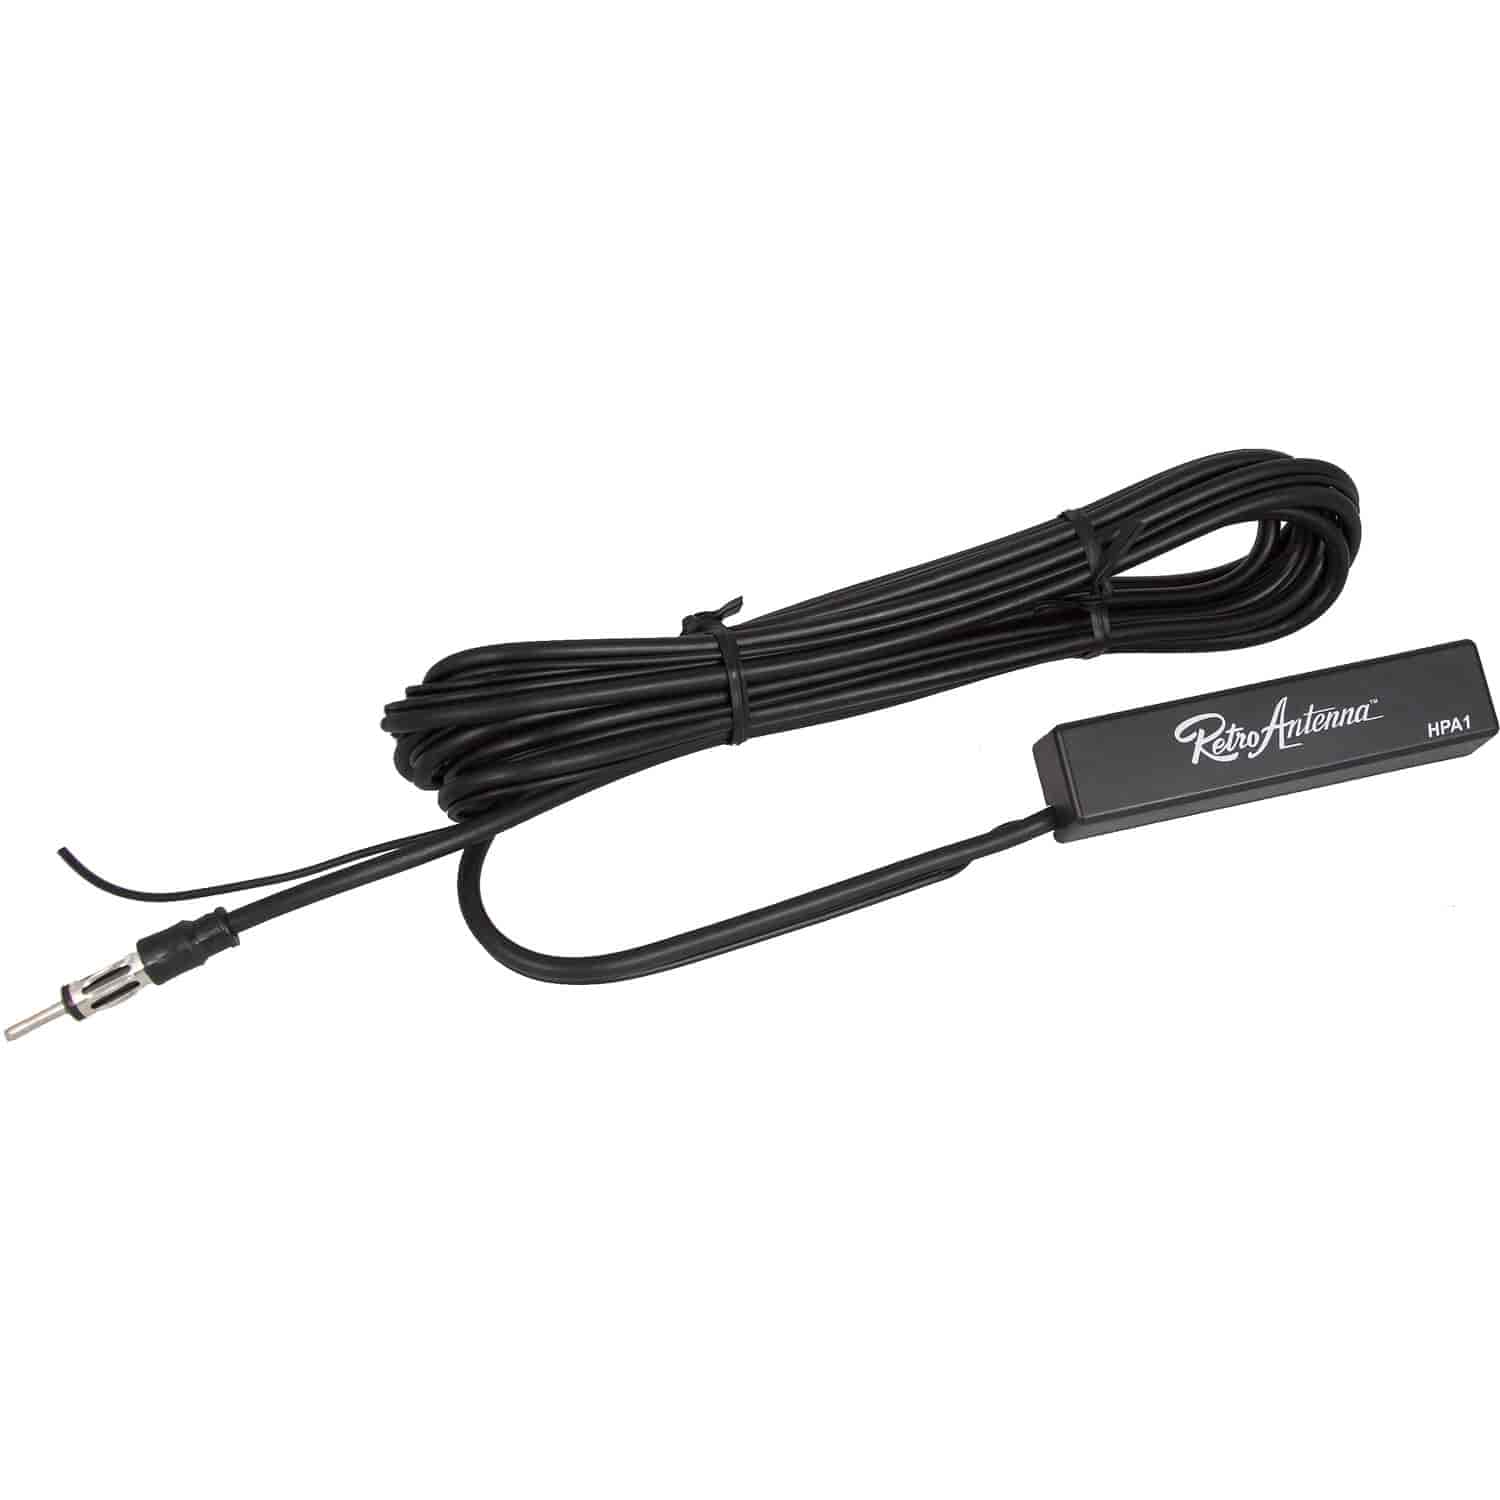 Amplified Hideaway Antenna Includes Power Lead and 105" Antenna Cable